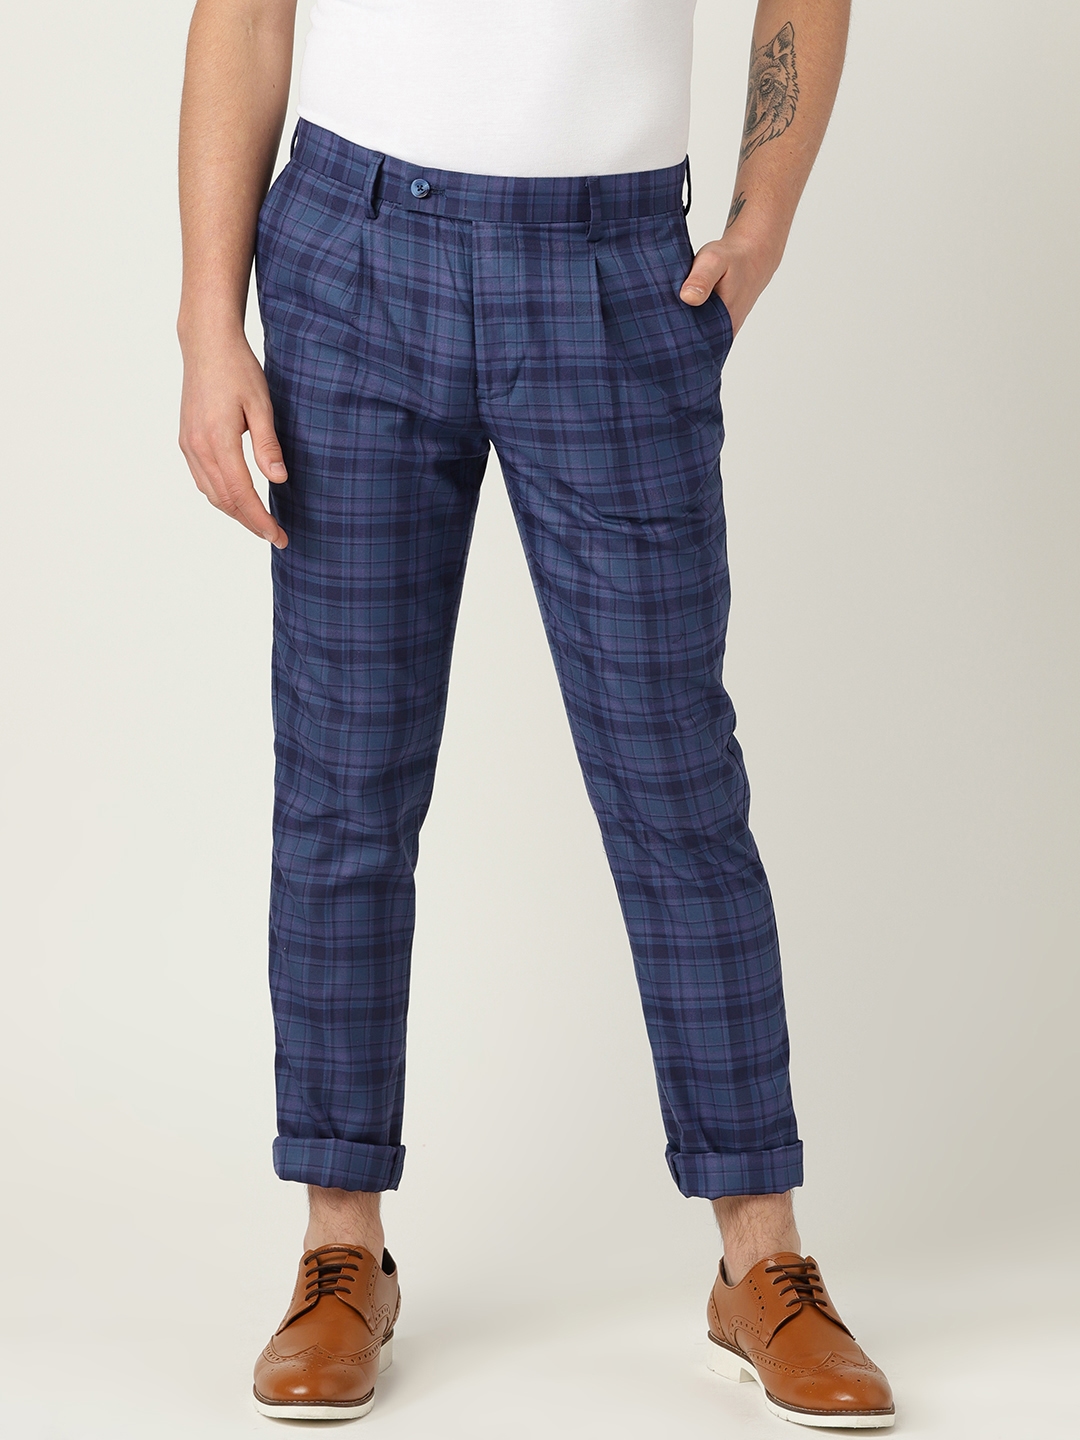 UNITED COLOR of BENETTON Check Tartan Wool Trousers Casual Pant